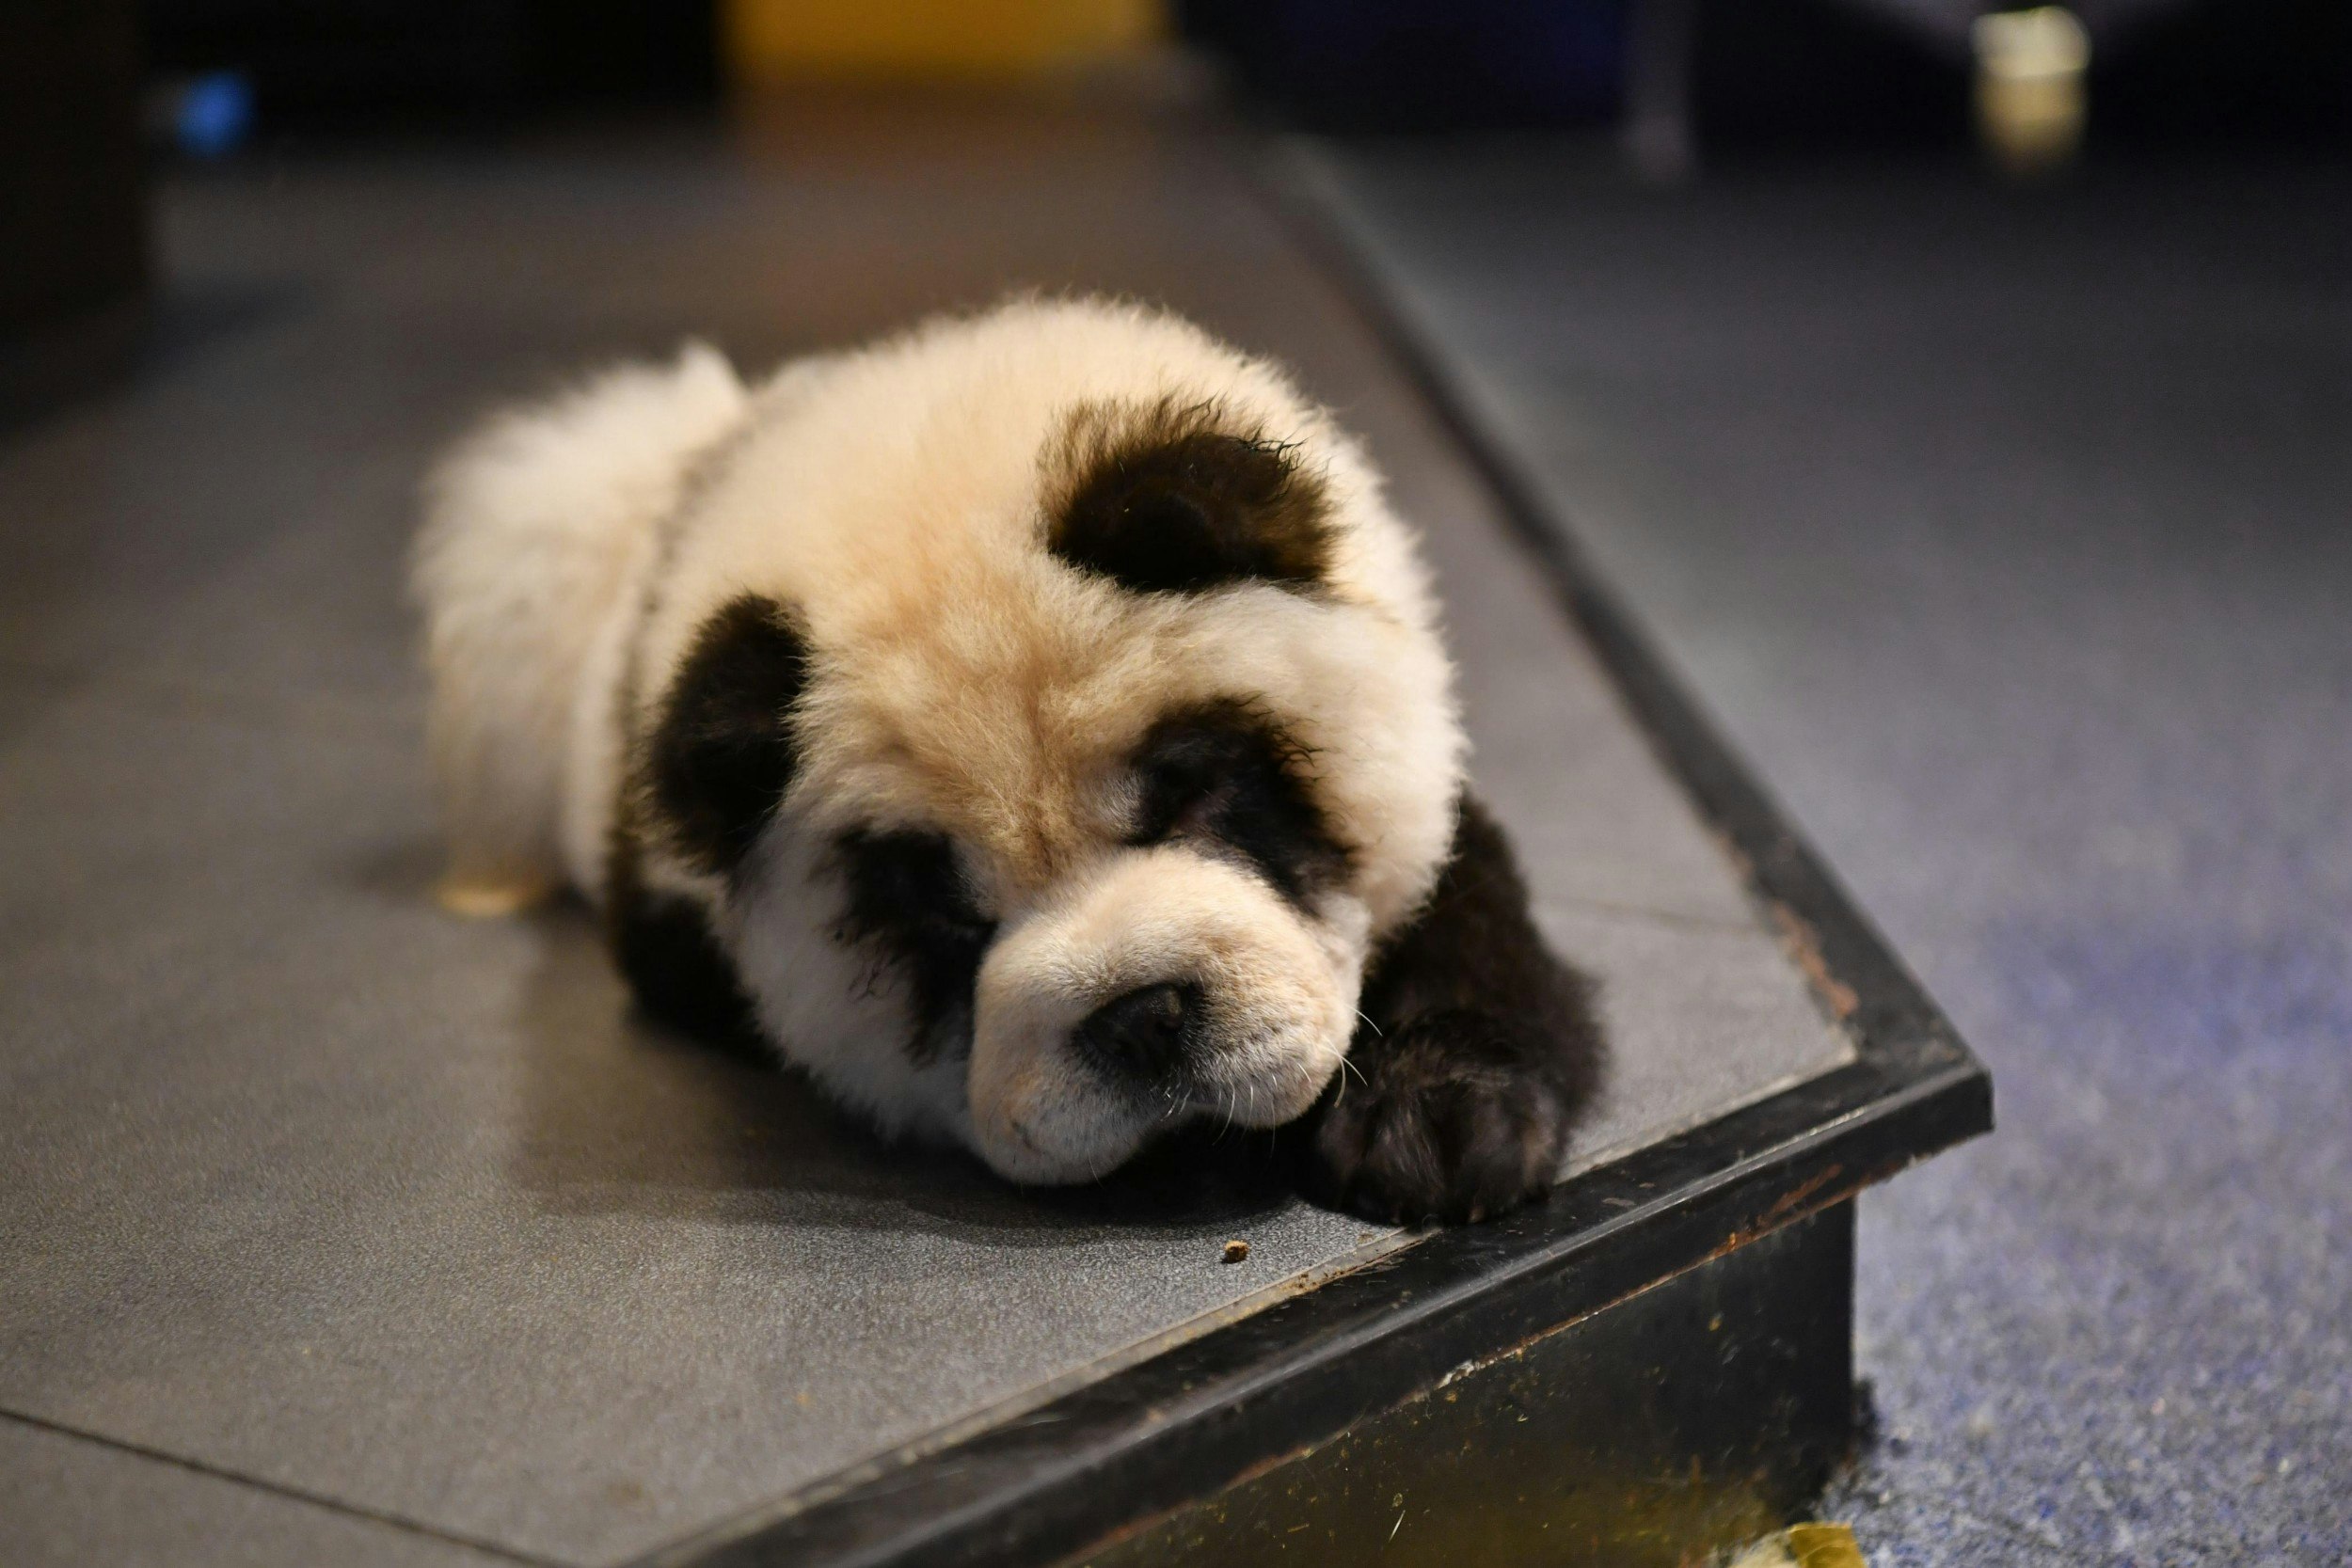 A chow chow dog painted as a giant panda as seen at a pet cafe in China